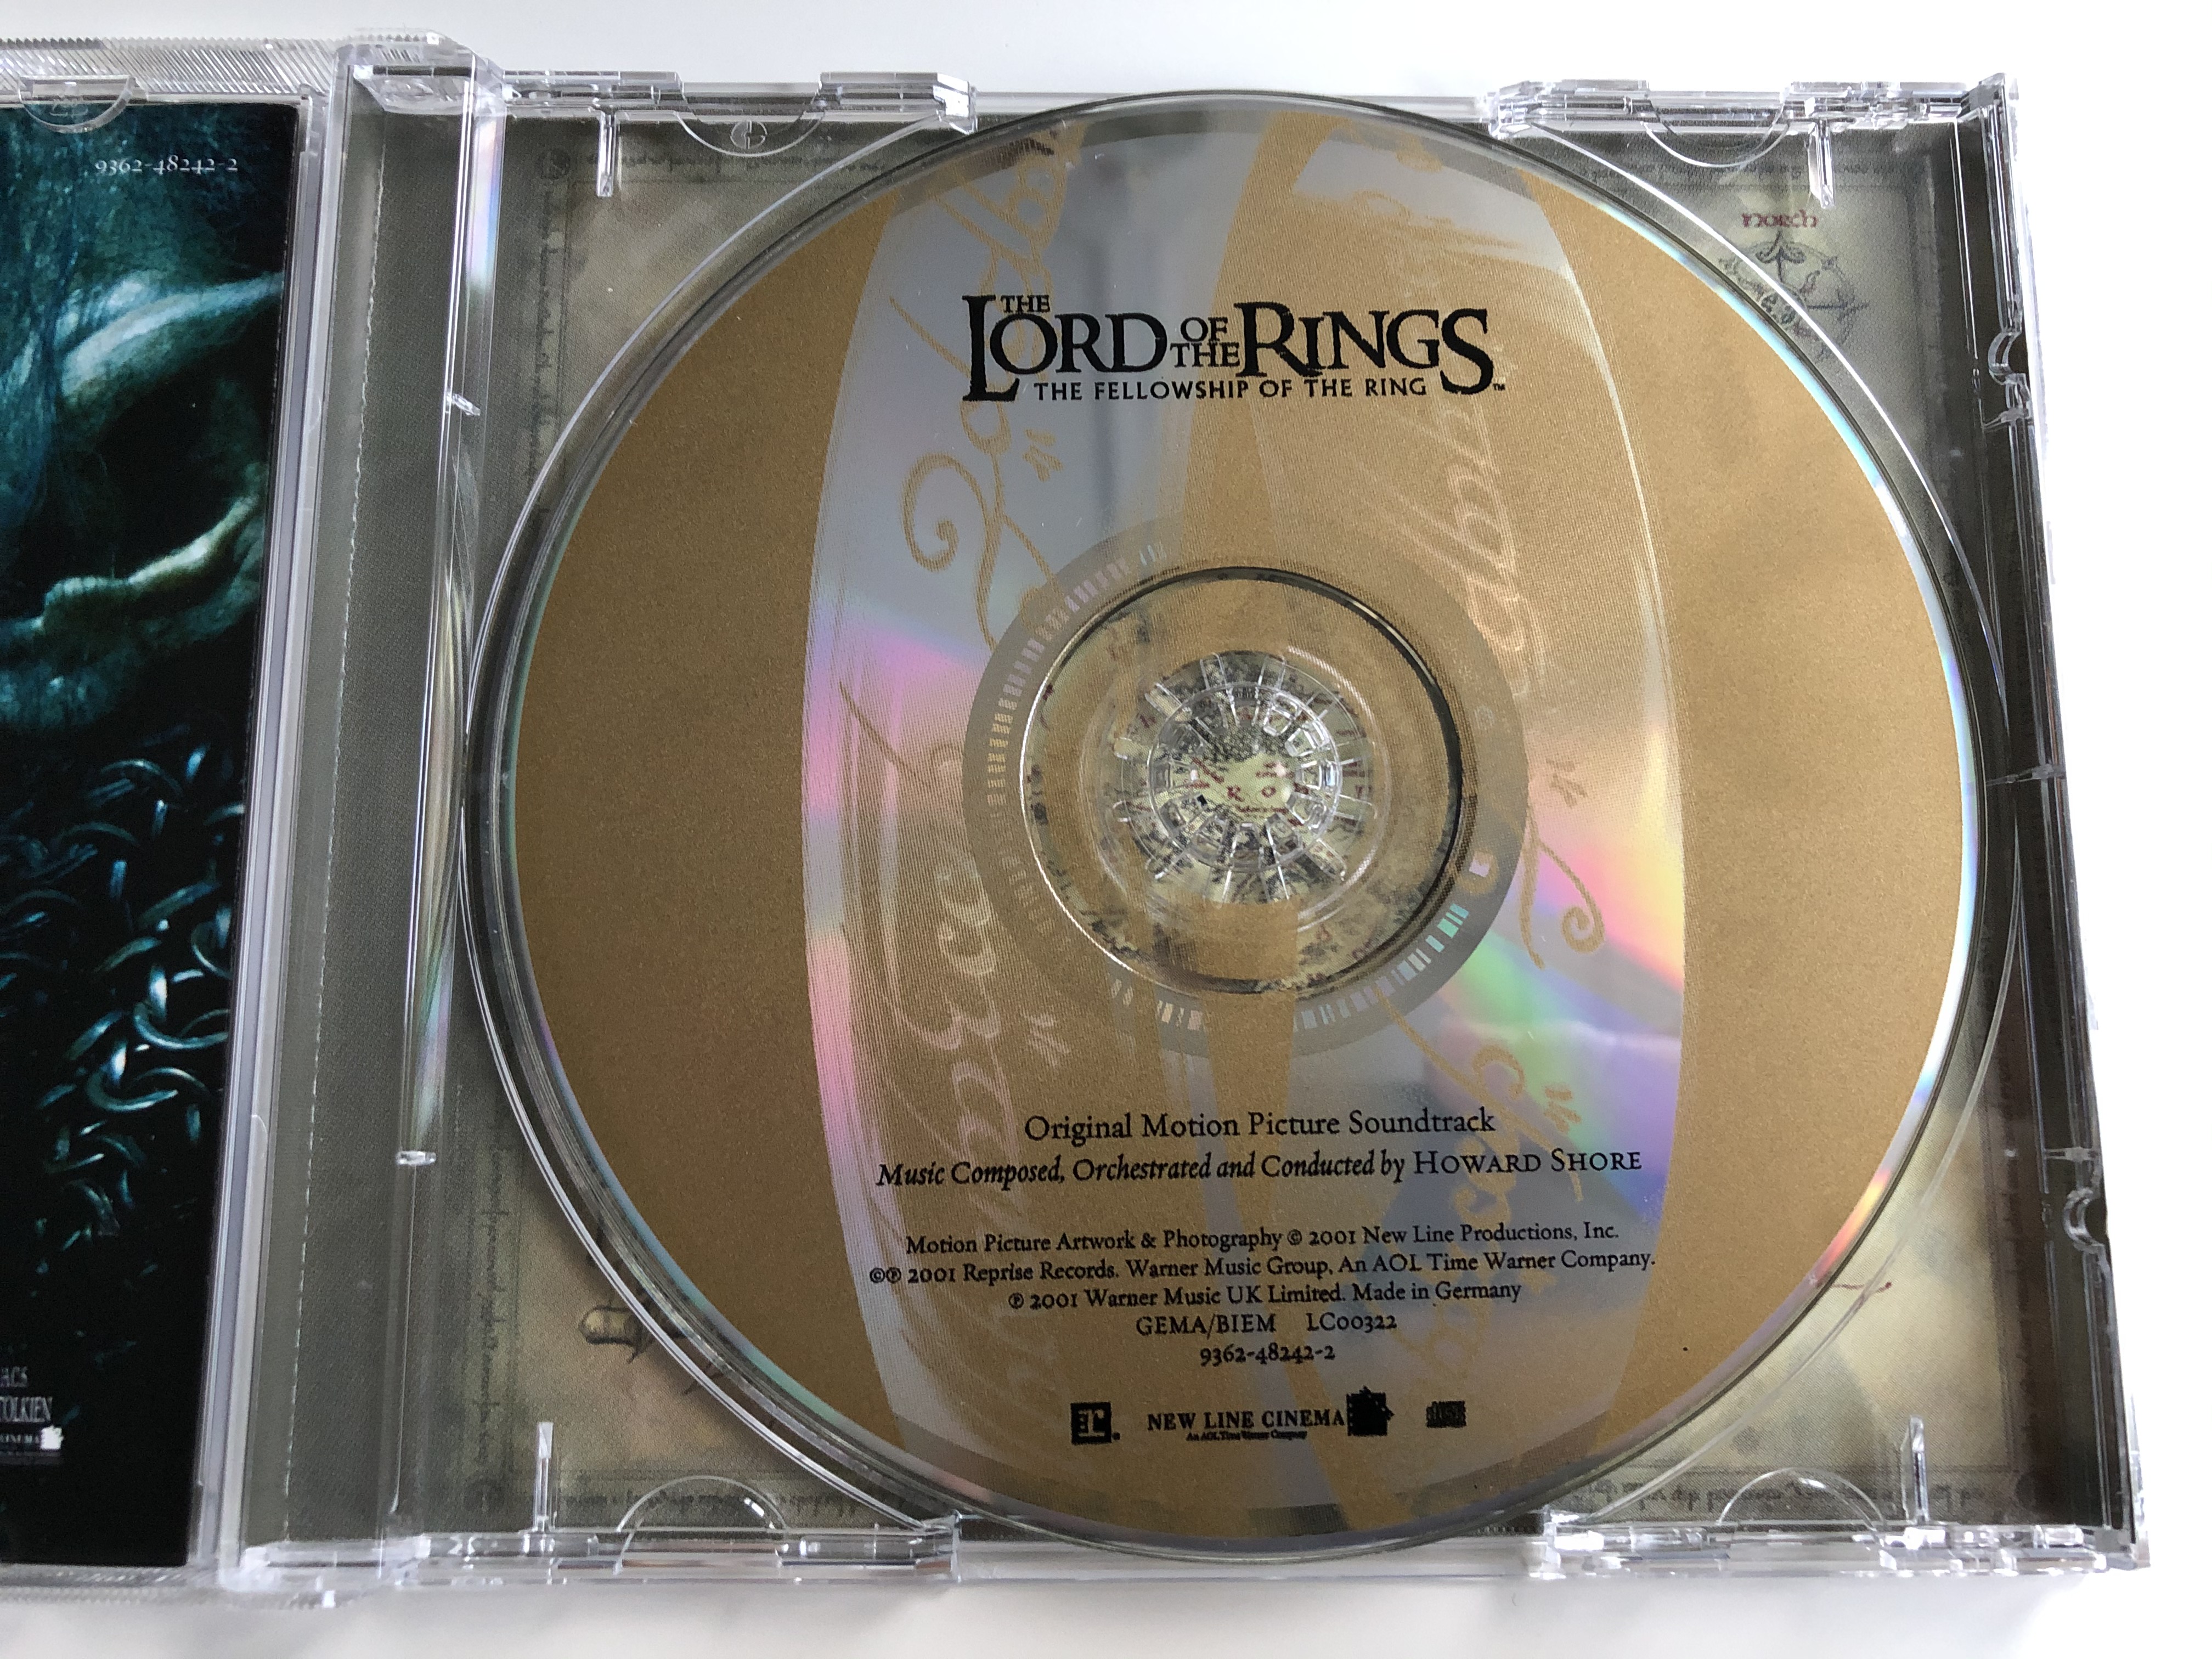 the-lord-of-the-rings-the-fellowship-of-the-ring-original-motion-picture-soundtrack-music-composed-orchestrated-and-conducted-by-howard-shore-reprise-records-audio-cd-2001-9362-48242-2-1-6-.jpg